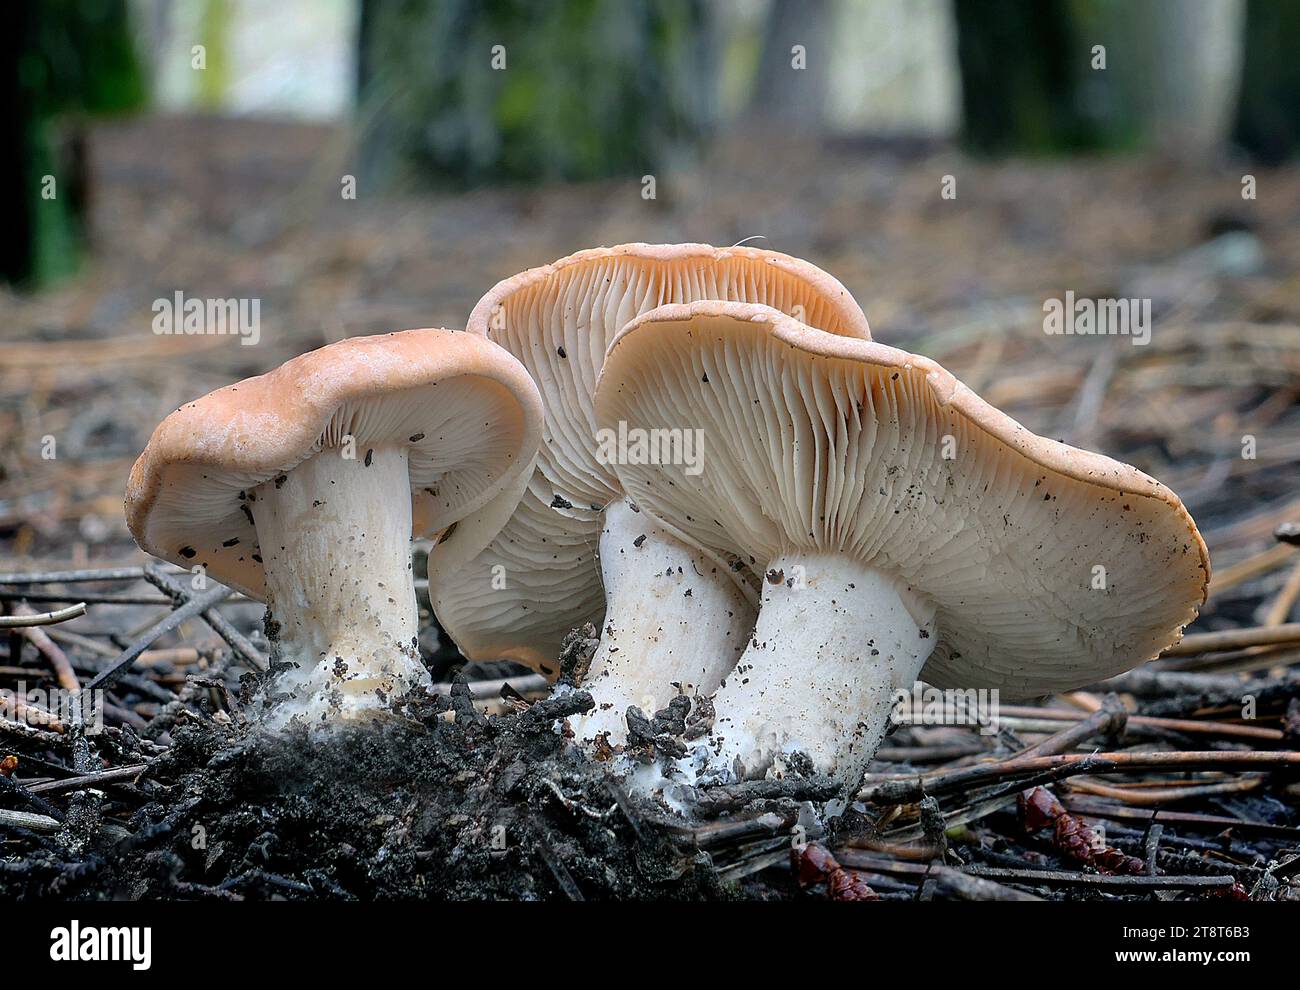 Hebeloma sp, Hebeloma is a genus of fungi in the family Hymenogastraceae. Found worldwide, it contains the poison pie or fairy cakes (Hebeloma crustuliniforme Stock Photo